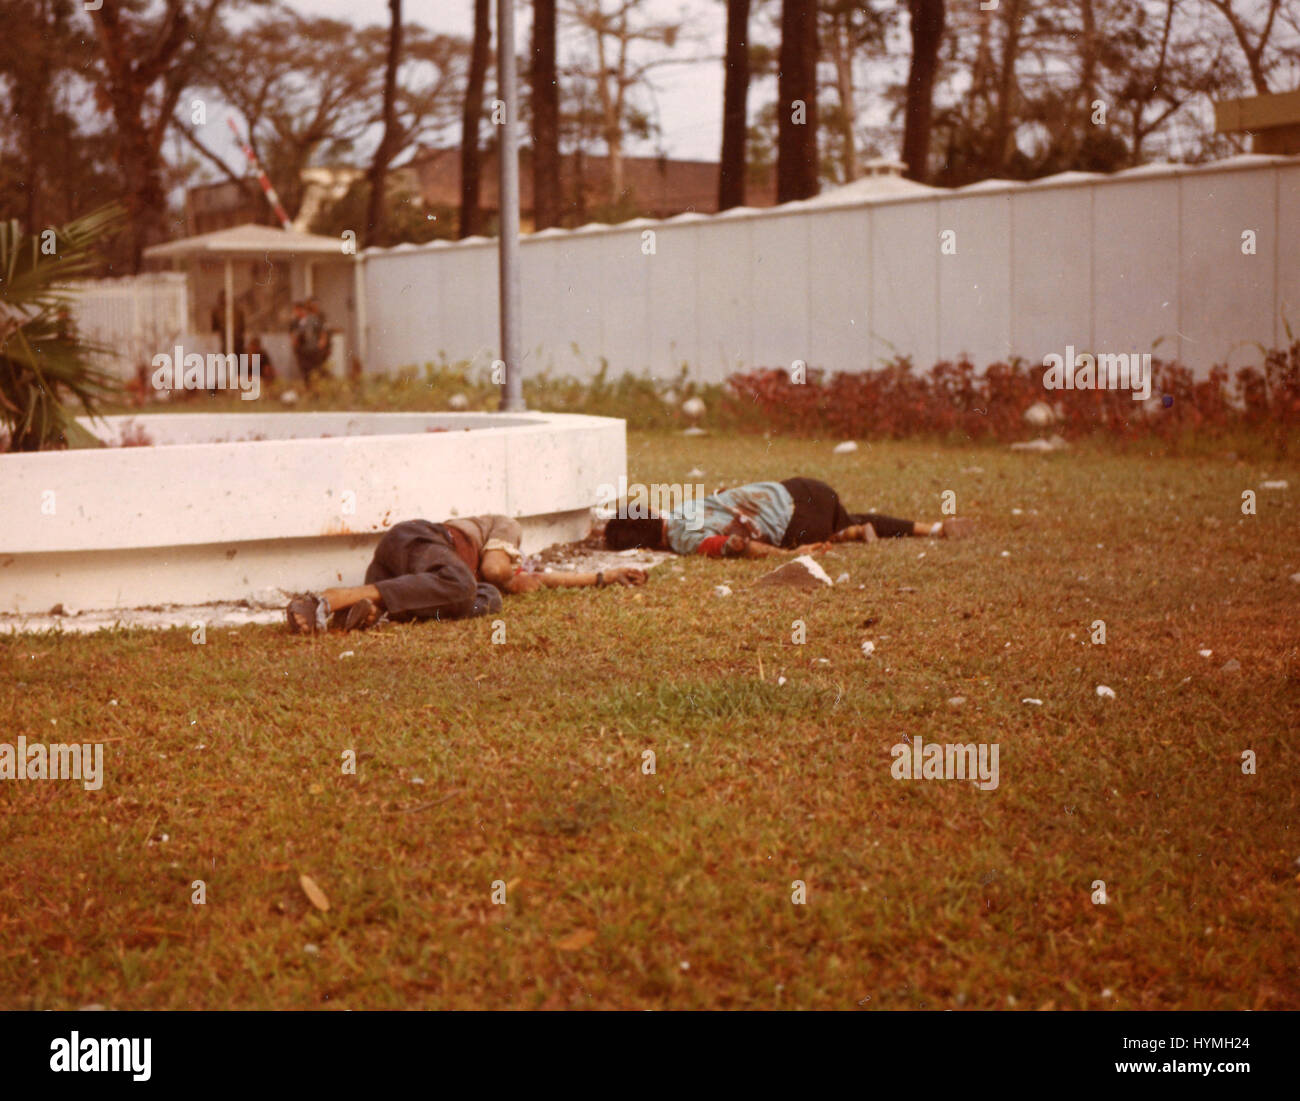 Viet Cong bodies lying on the grounds of the American embassy after VC attack during Tet. Saigon, Republic of Vietnam. 31 January 1968. Stock Photo